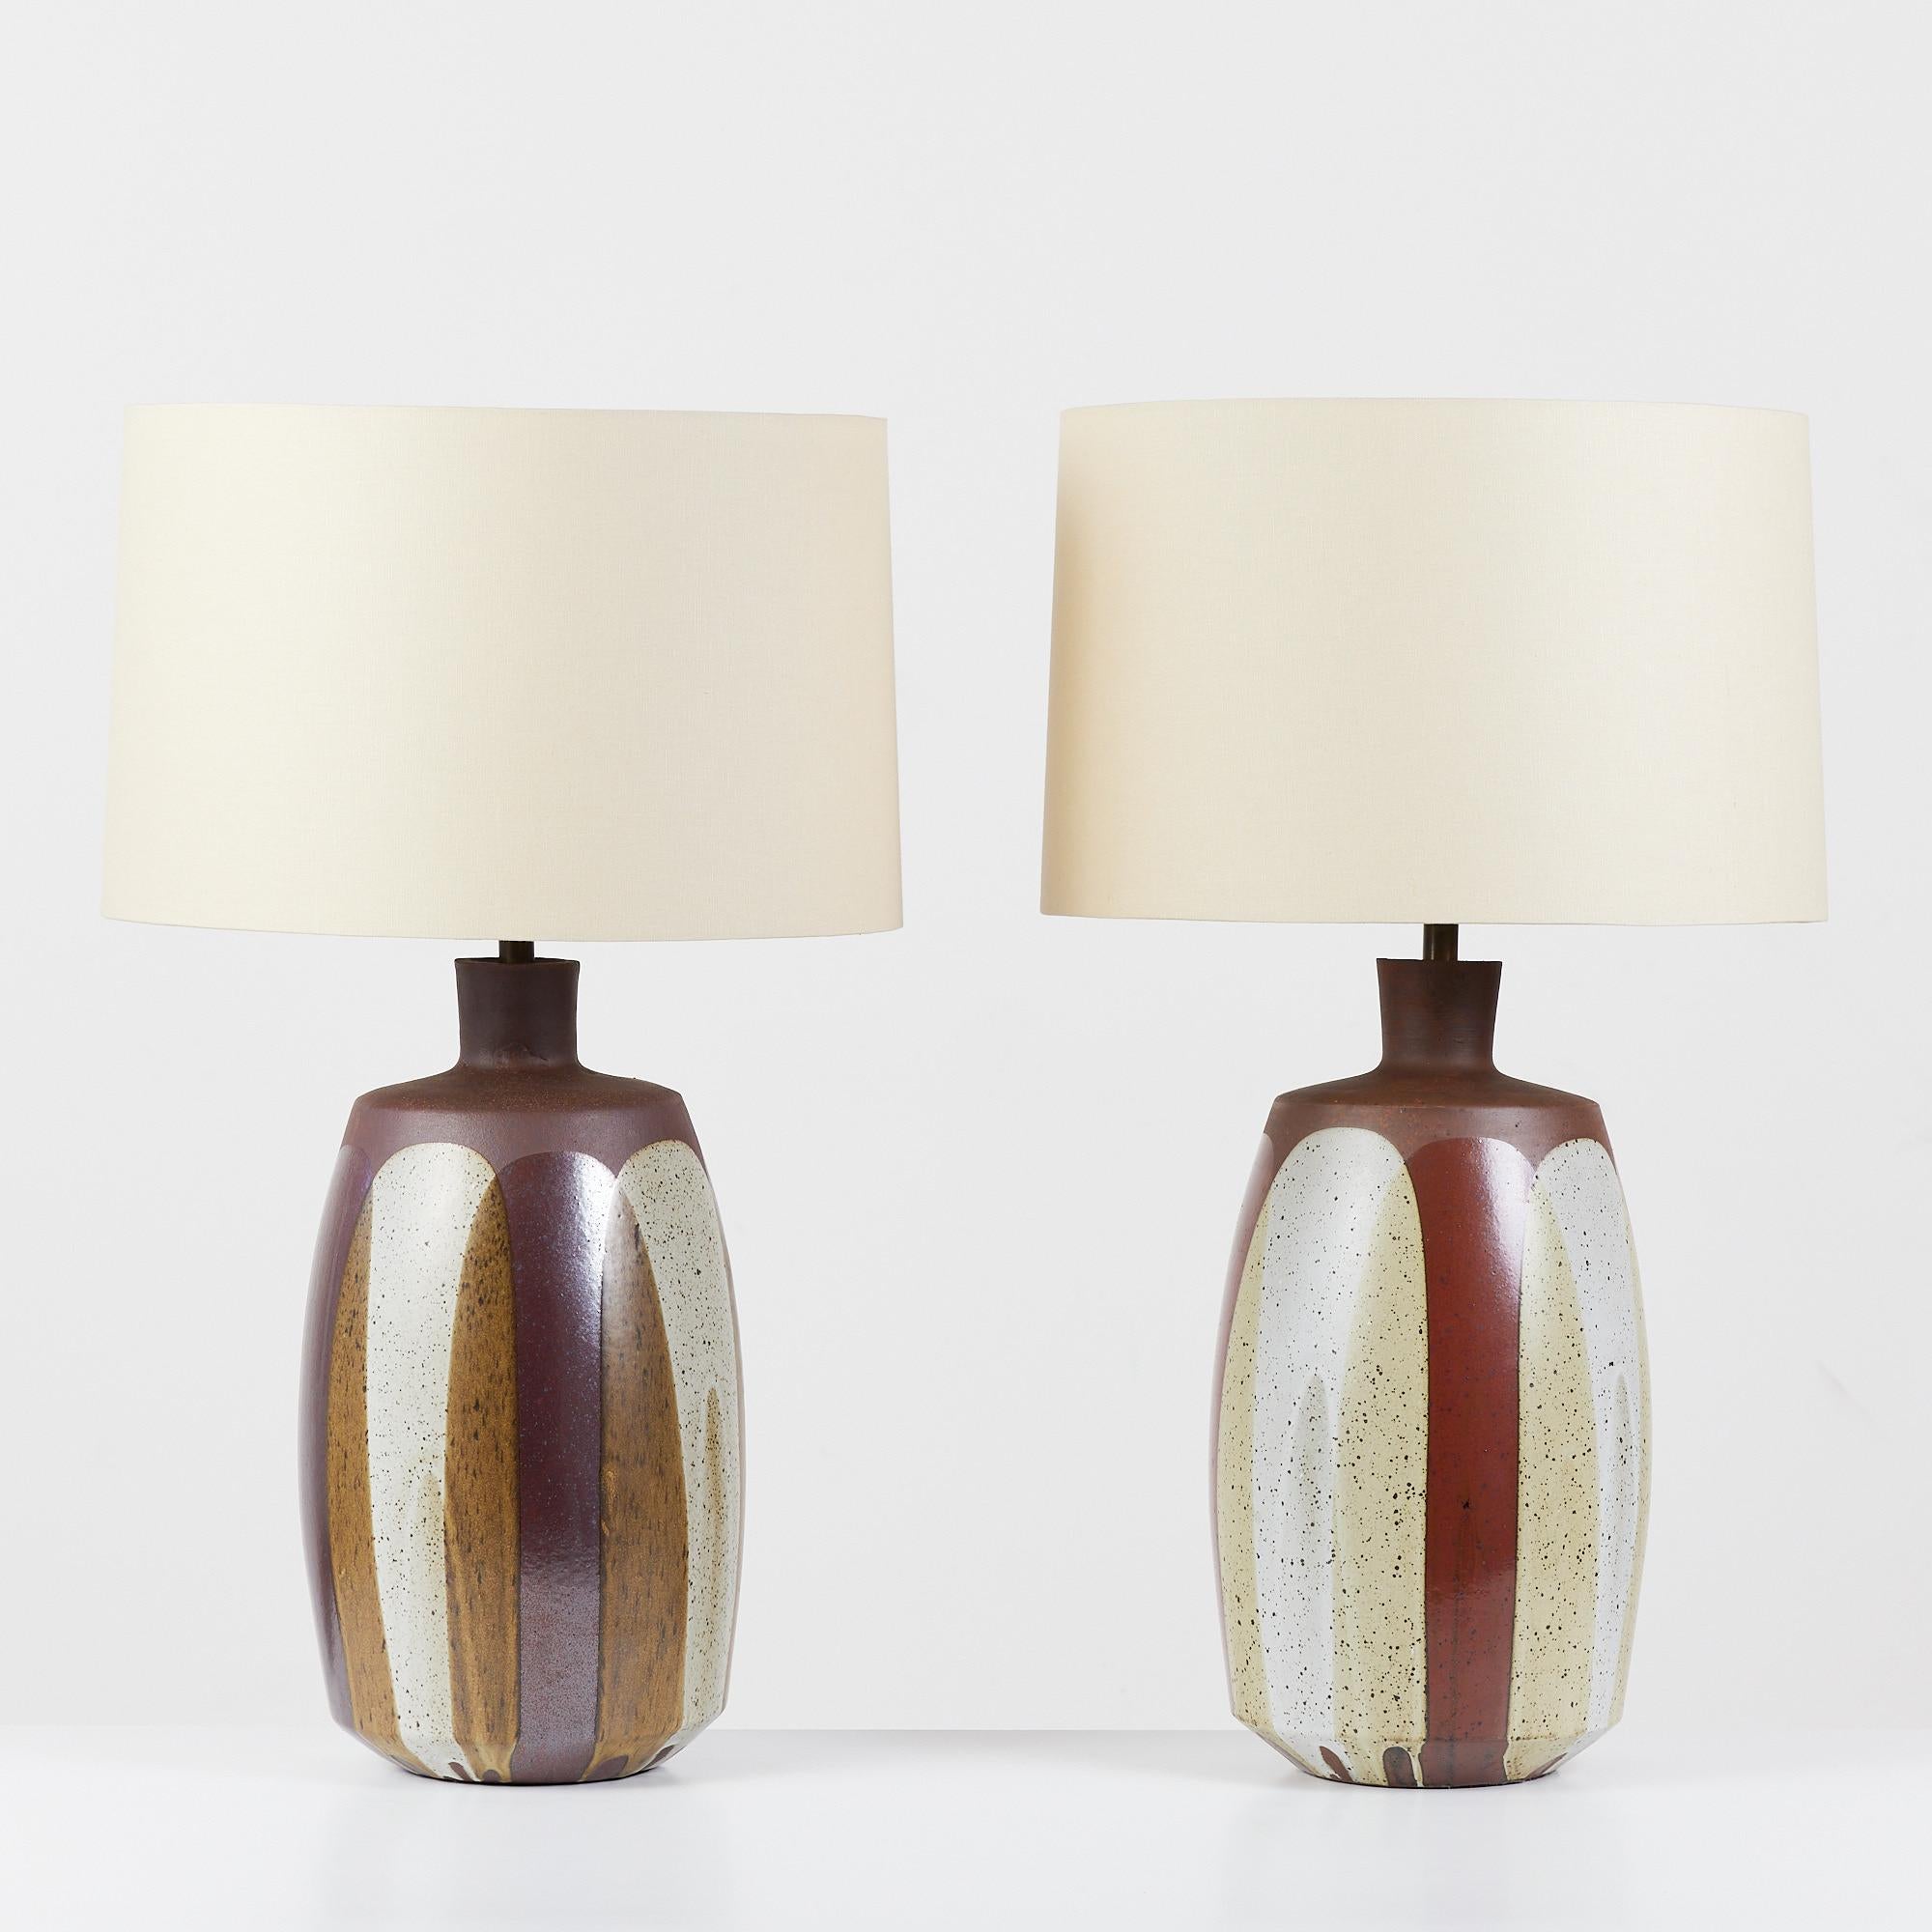 Pair of David Cressey flame glaze lamps, c.1960's, USA. The wheel thrown stoneware lamps feature a speckled flame glaze detail. The glaze pattern drip lines terminate near the base of the lamp, mimicking the pattern of flames. The newly rewired